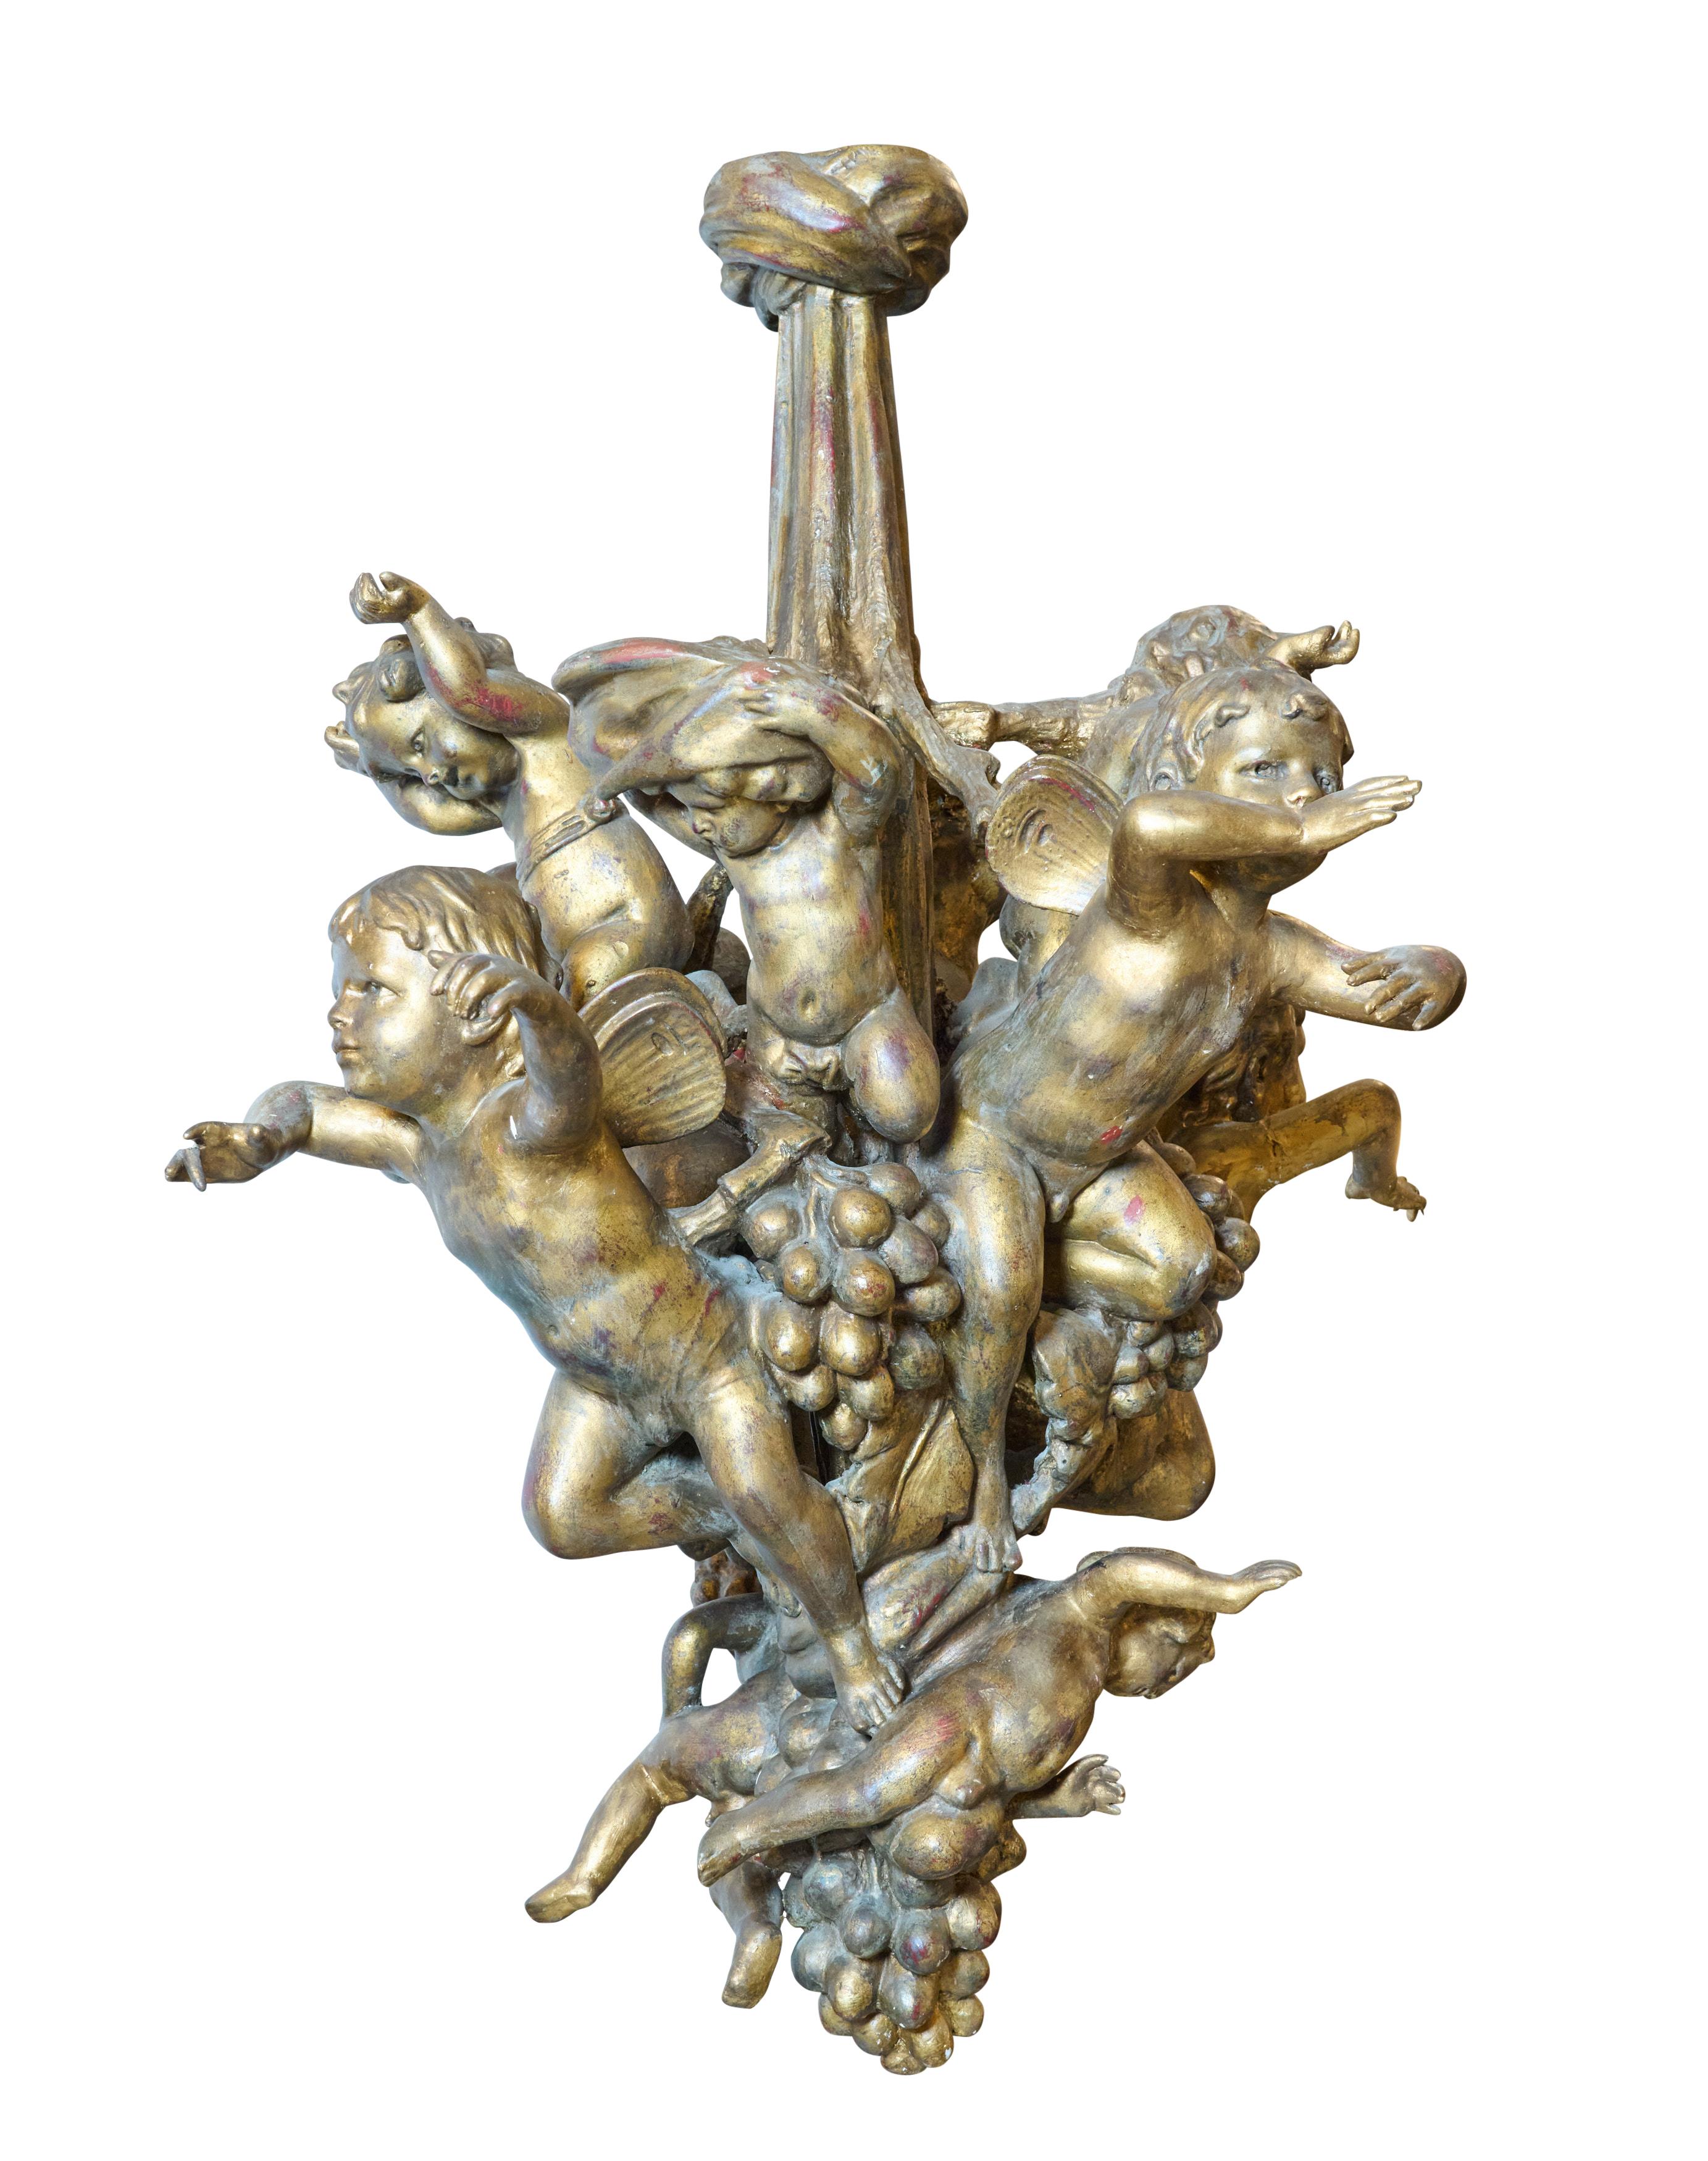 The best gesso and gold leaf chandelier with putti. Bought in Buenos Aires. Great patina.